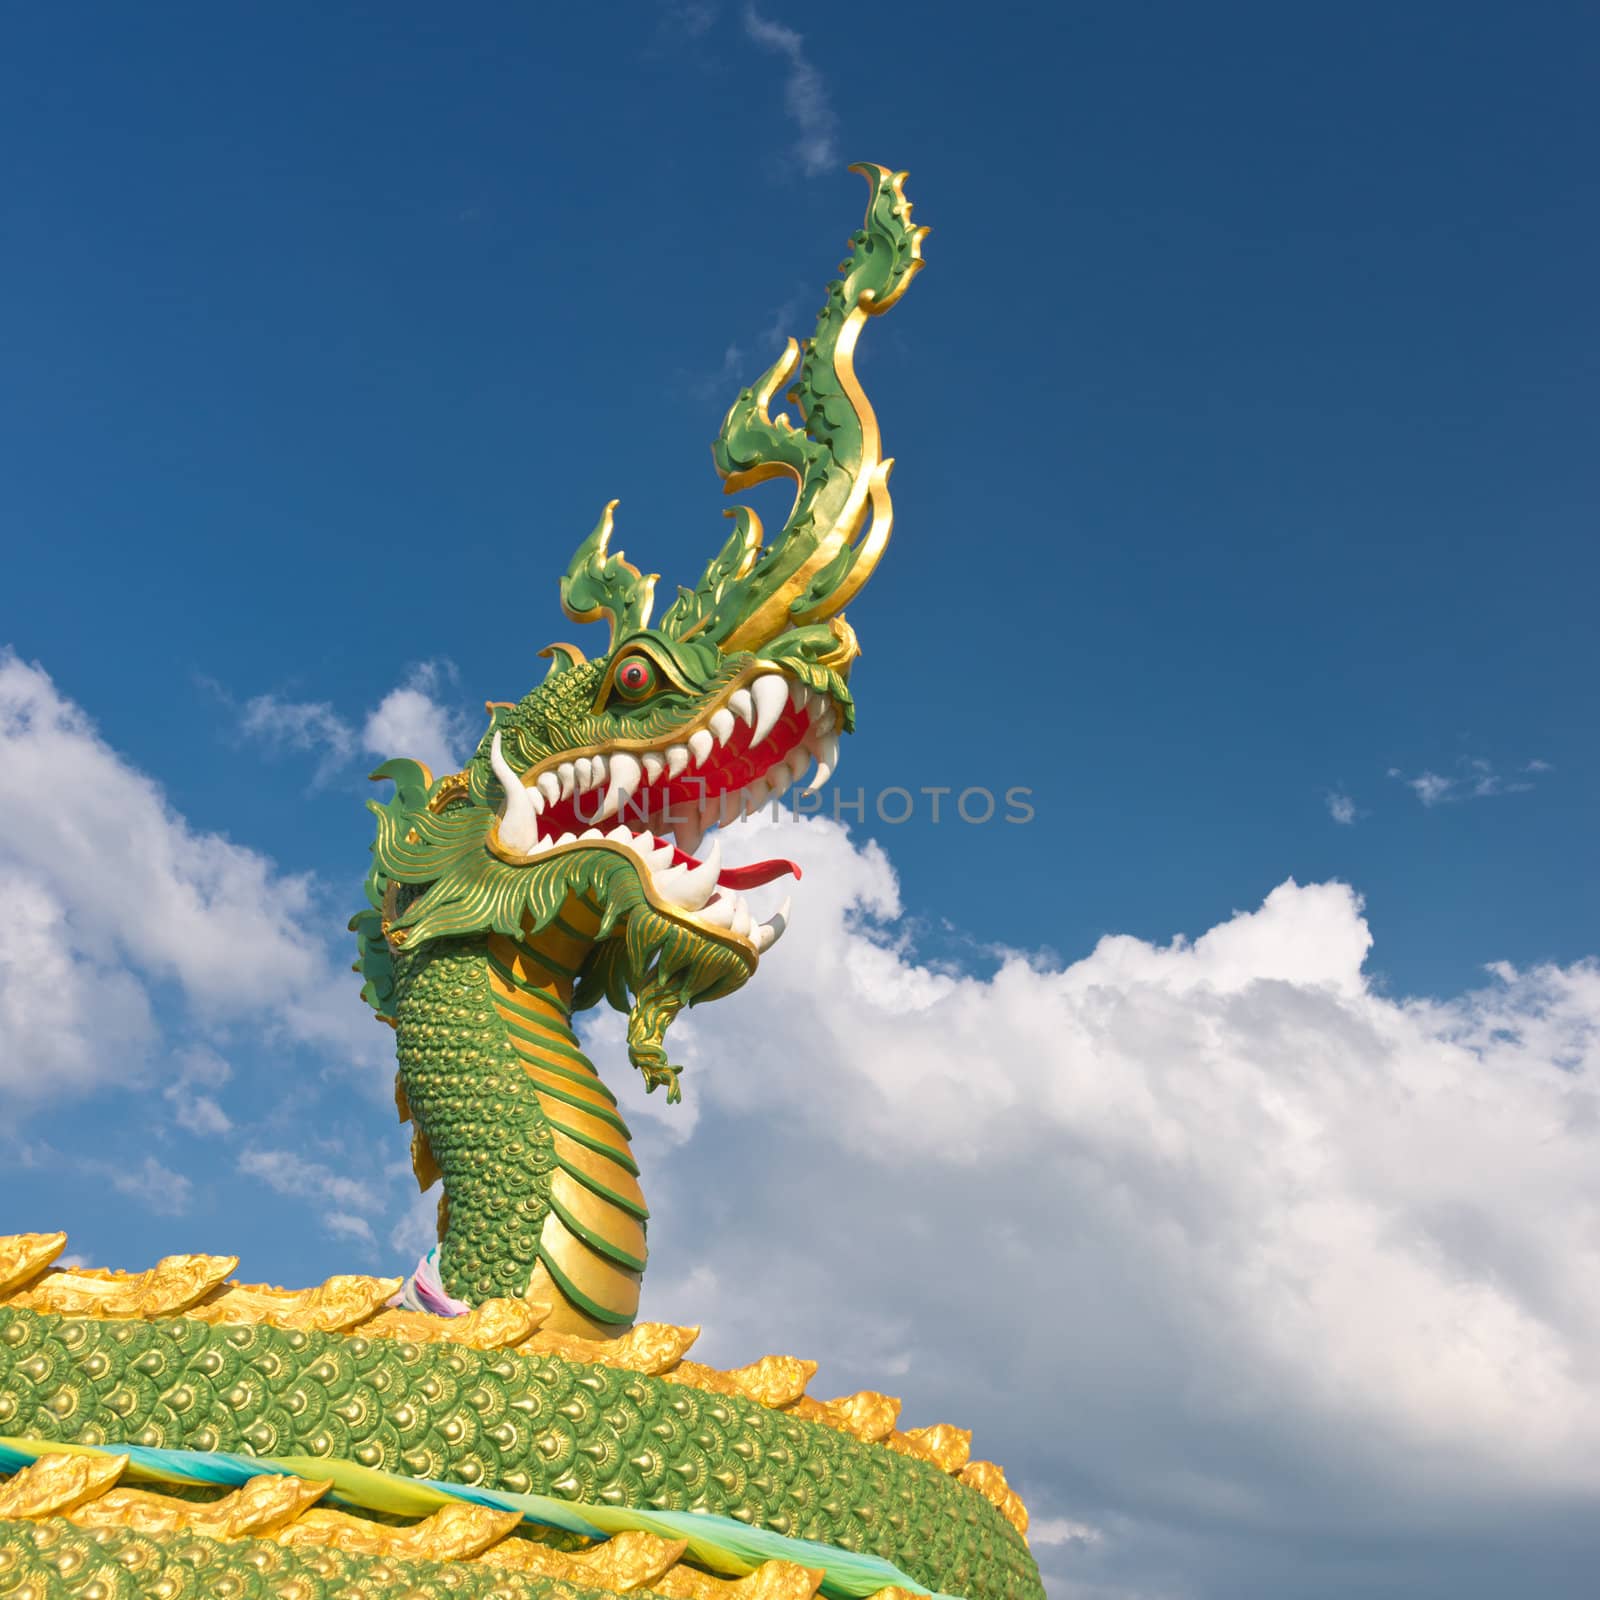 Fragment of dragon statue by timbrk